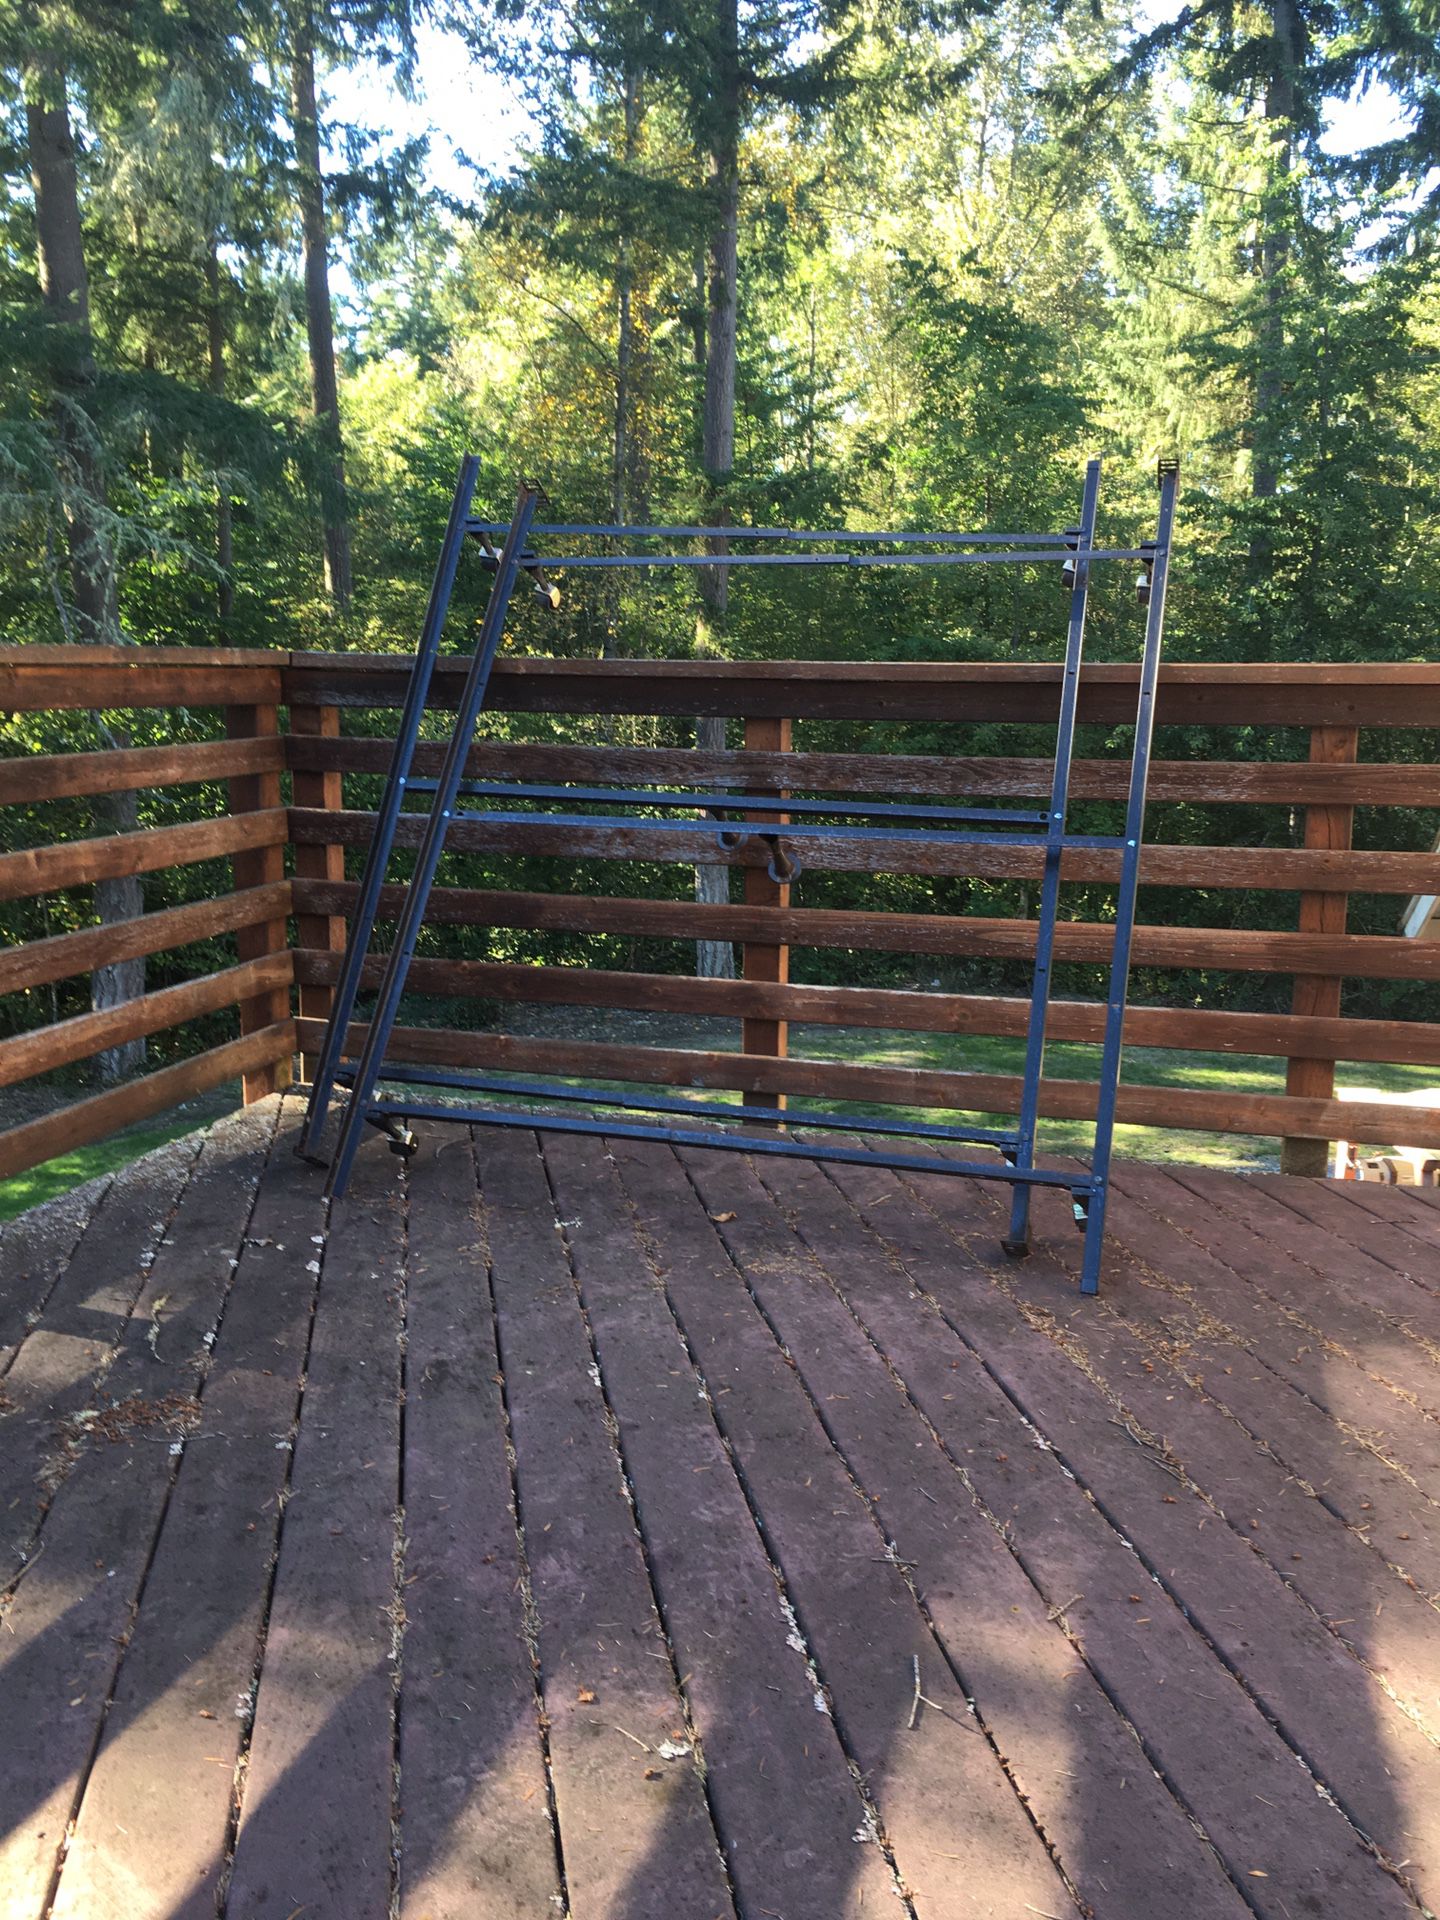 *Pending Pickup*Free Queen size bed frames